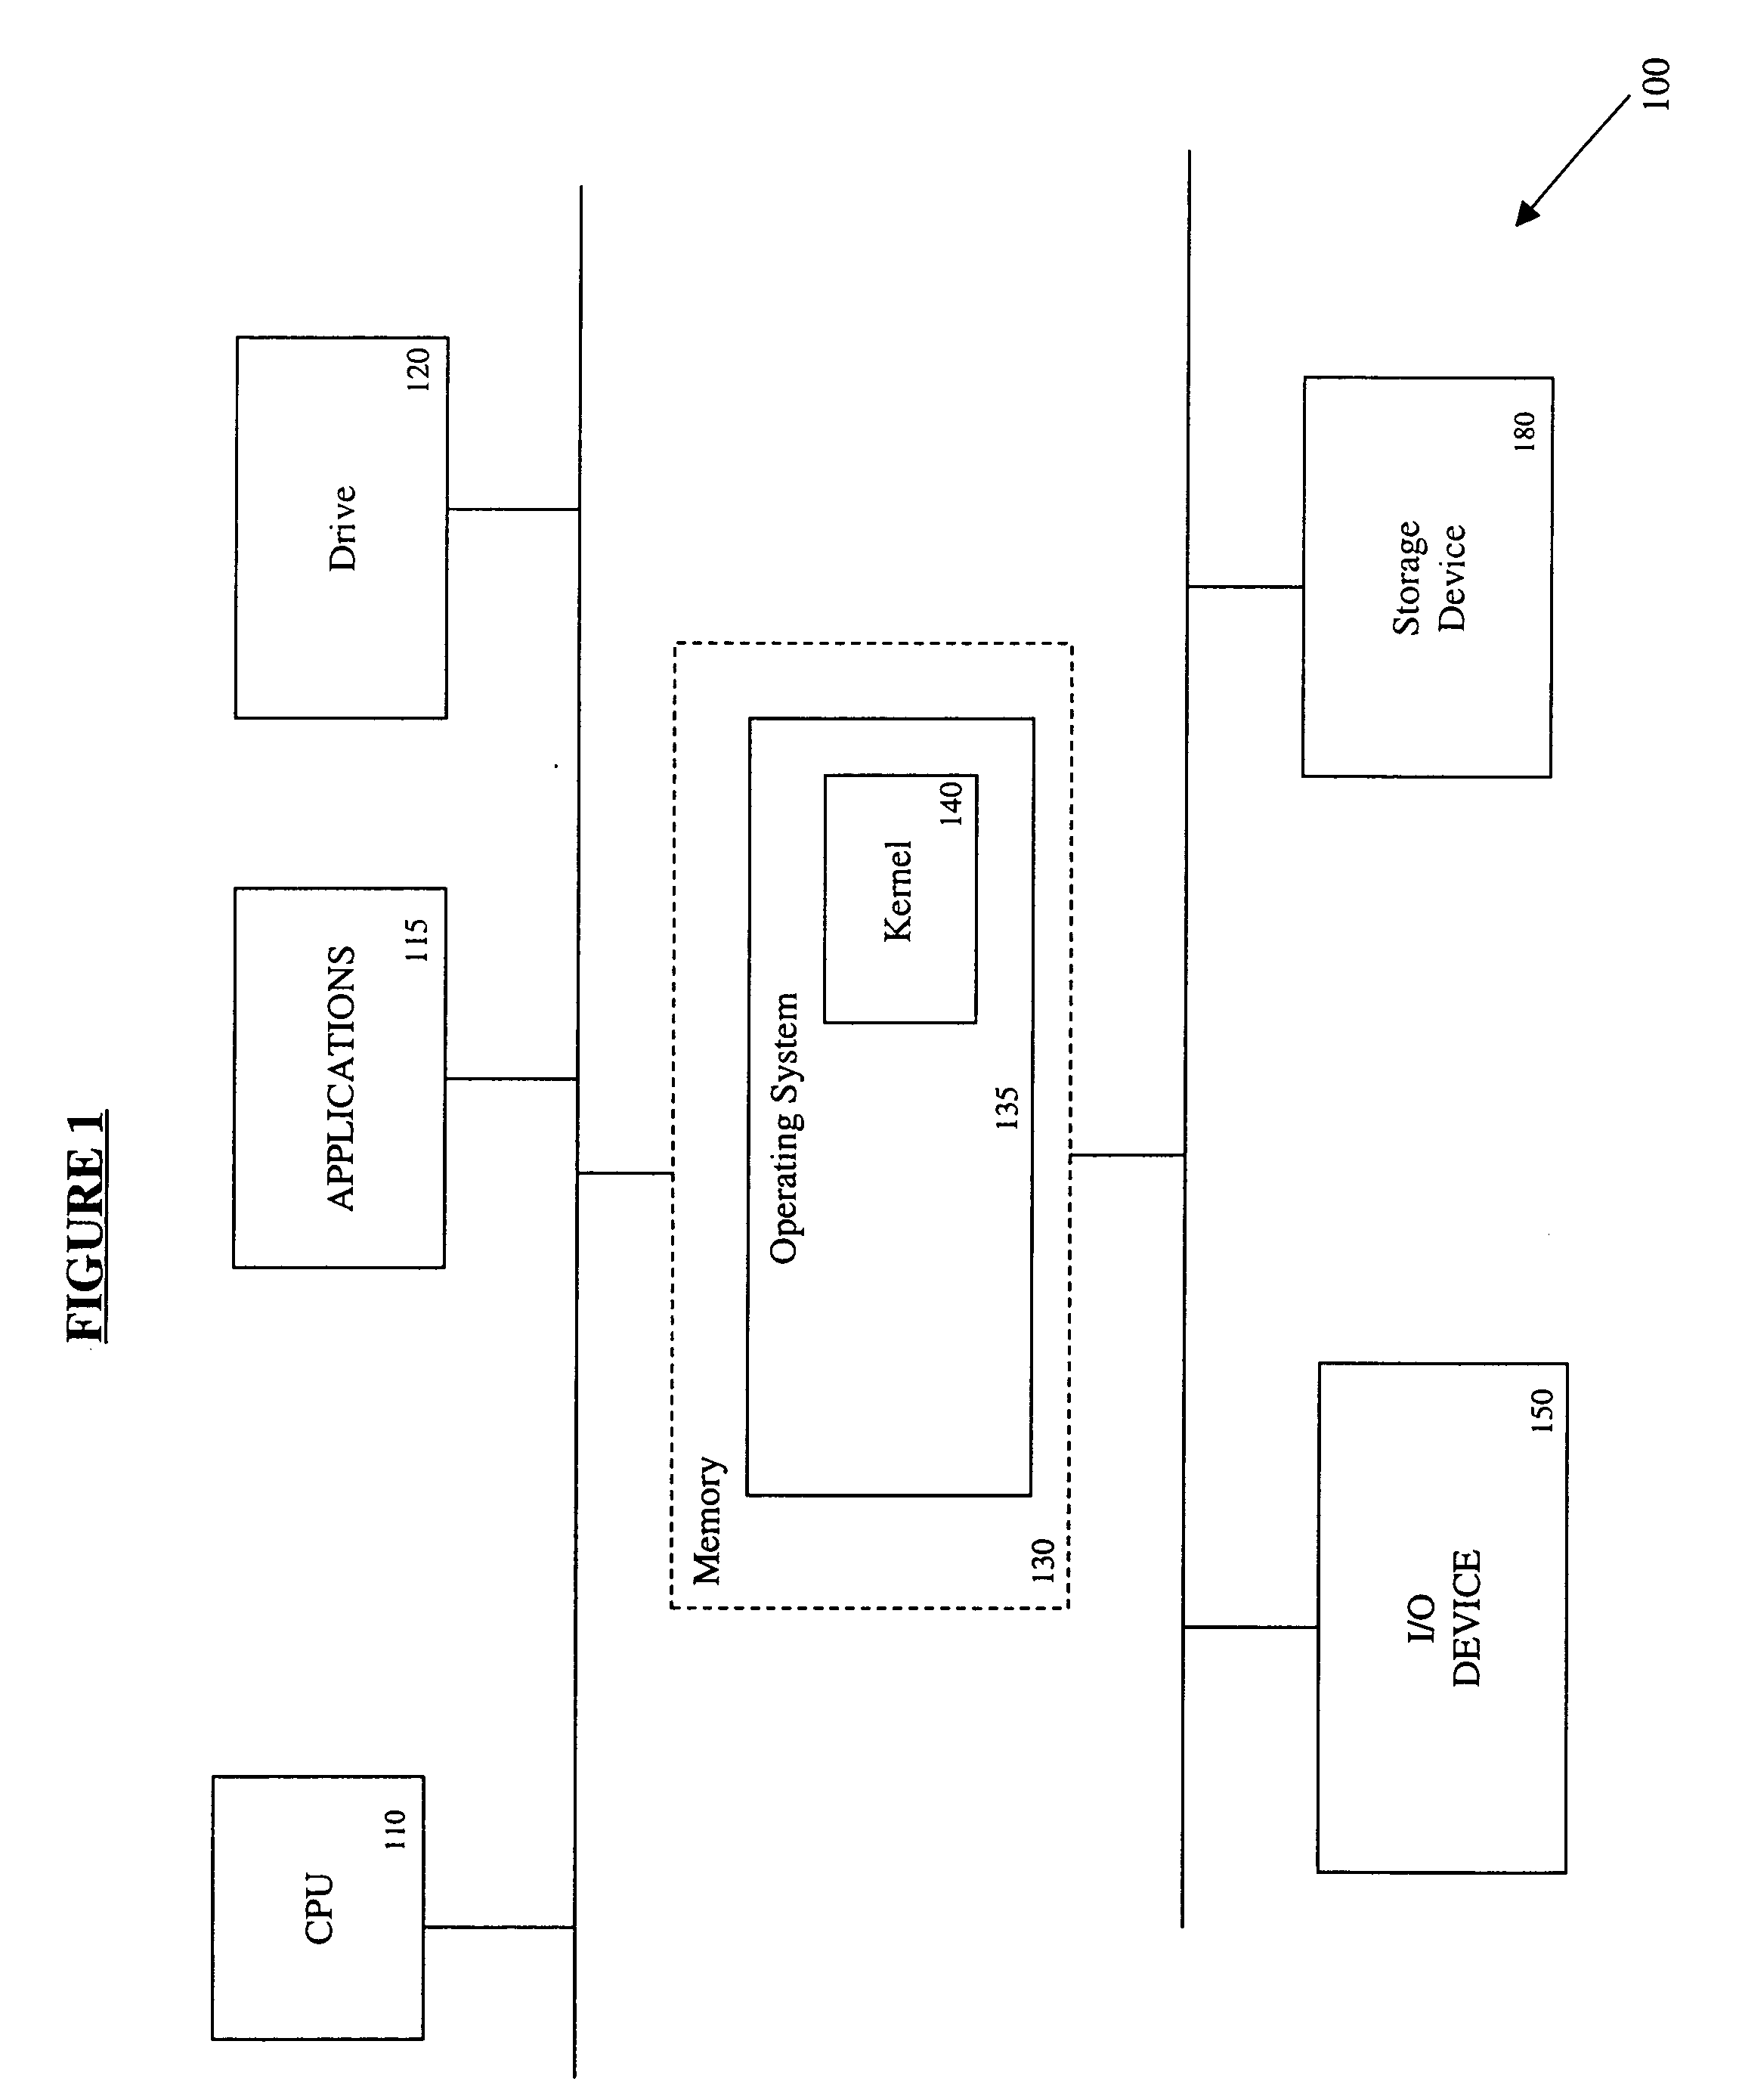 Kernel cryptographic module signature verification system and method